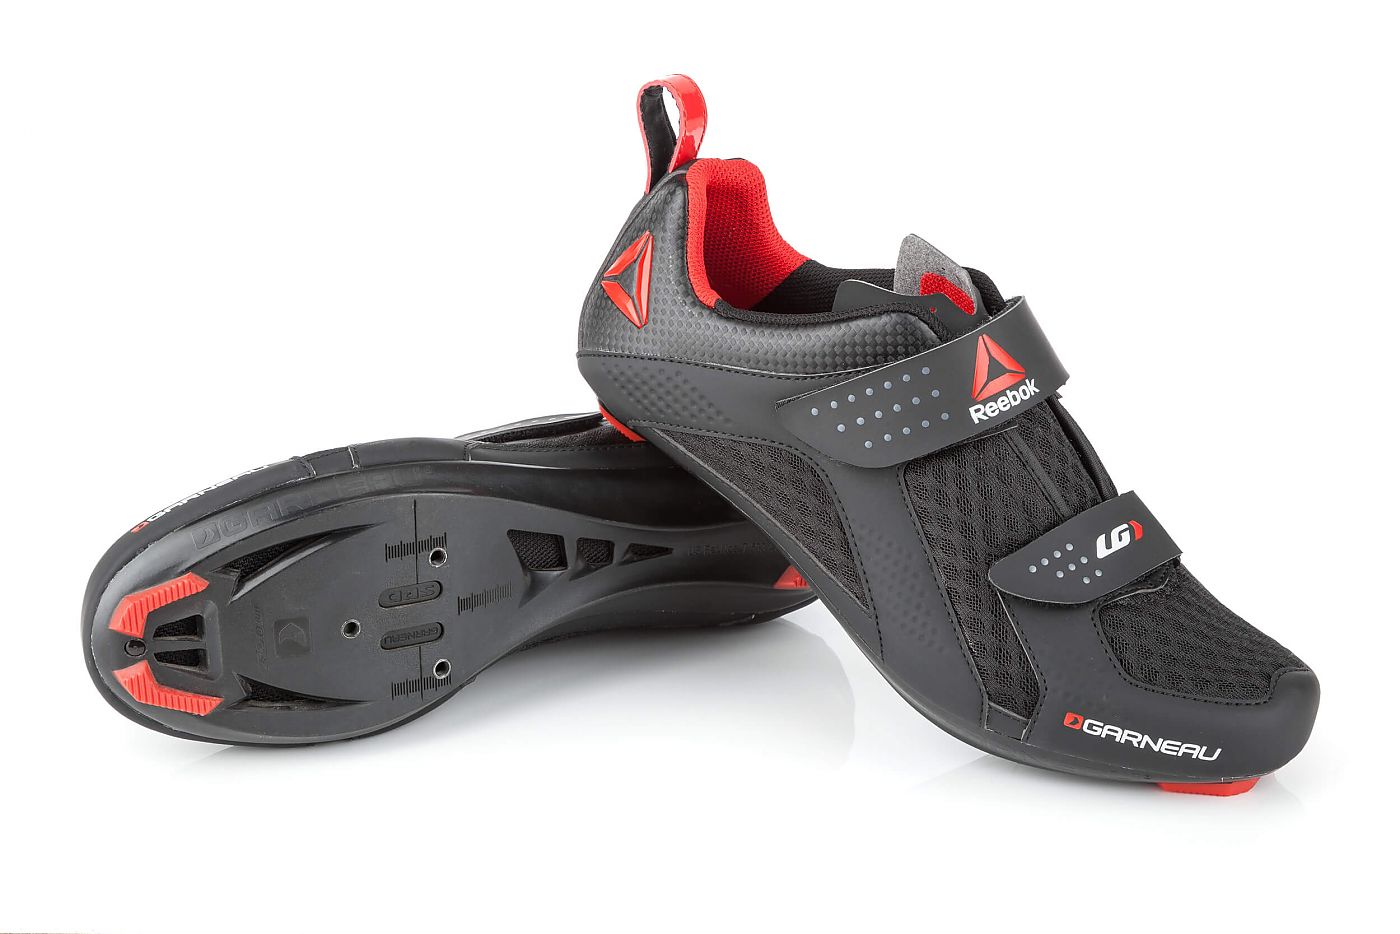 www.semadata.org | Garneau and Reebok Partner to Create Indoor Specific Cycling Shoe